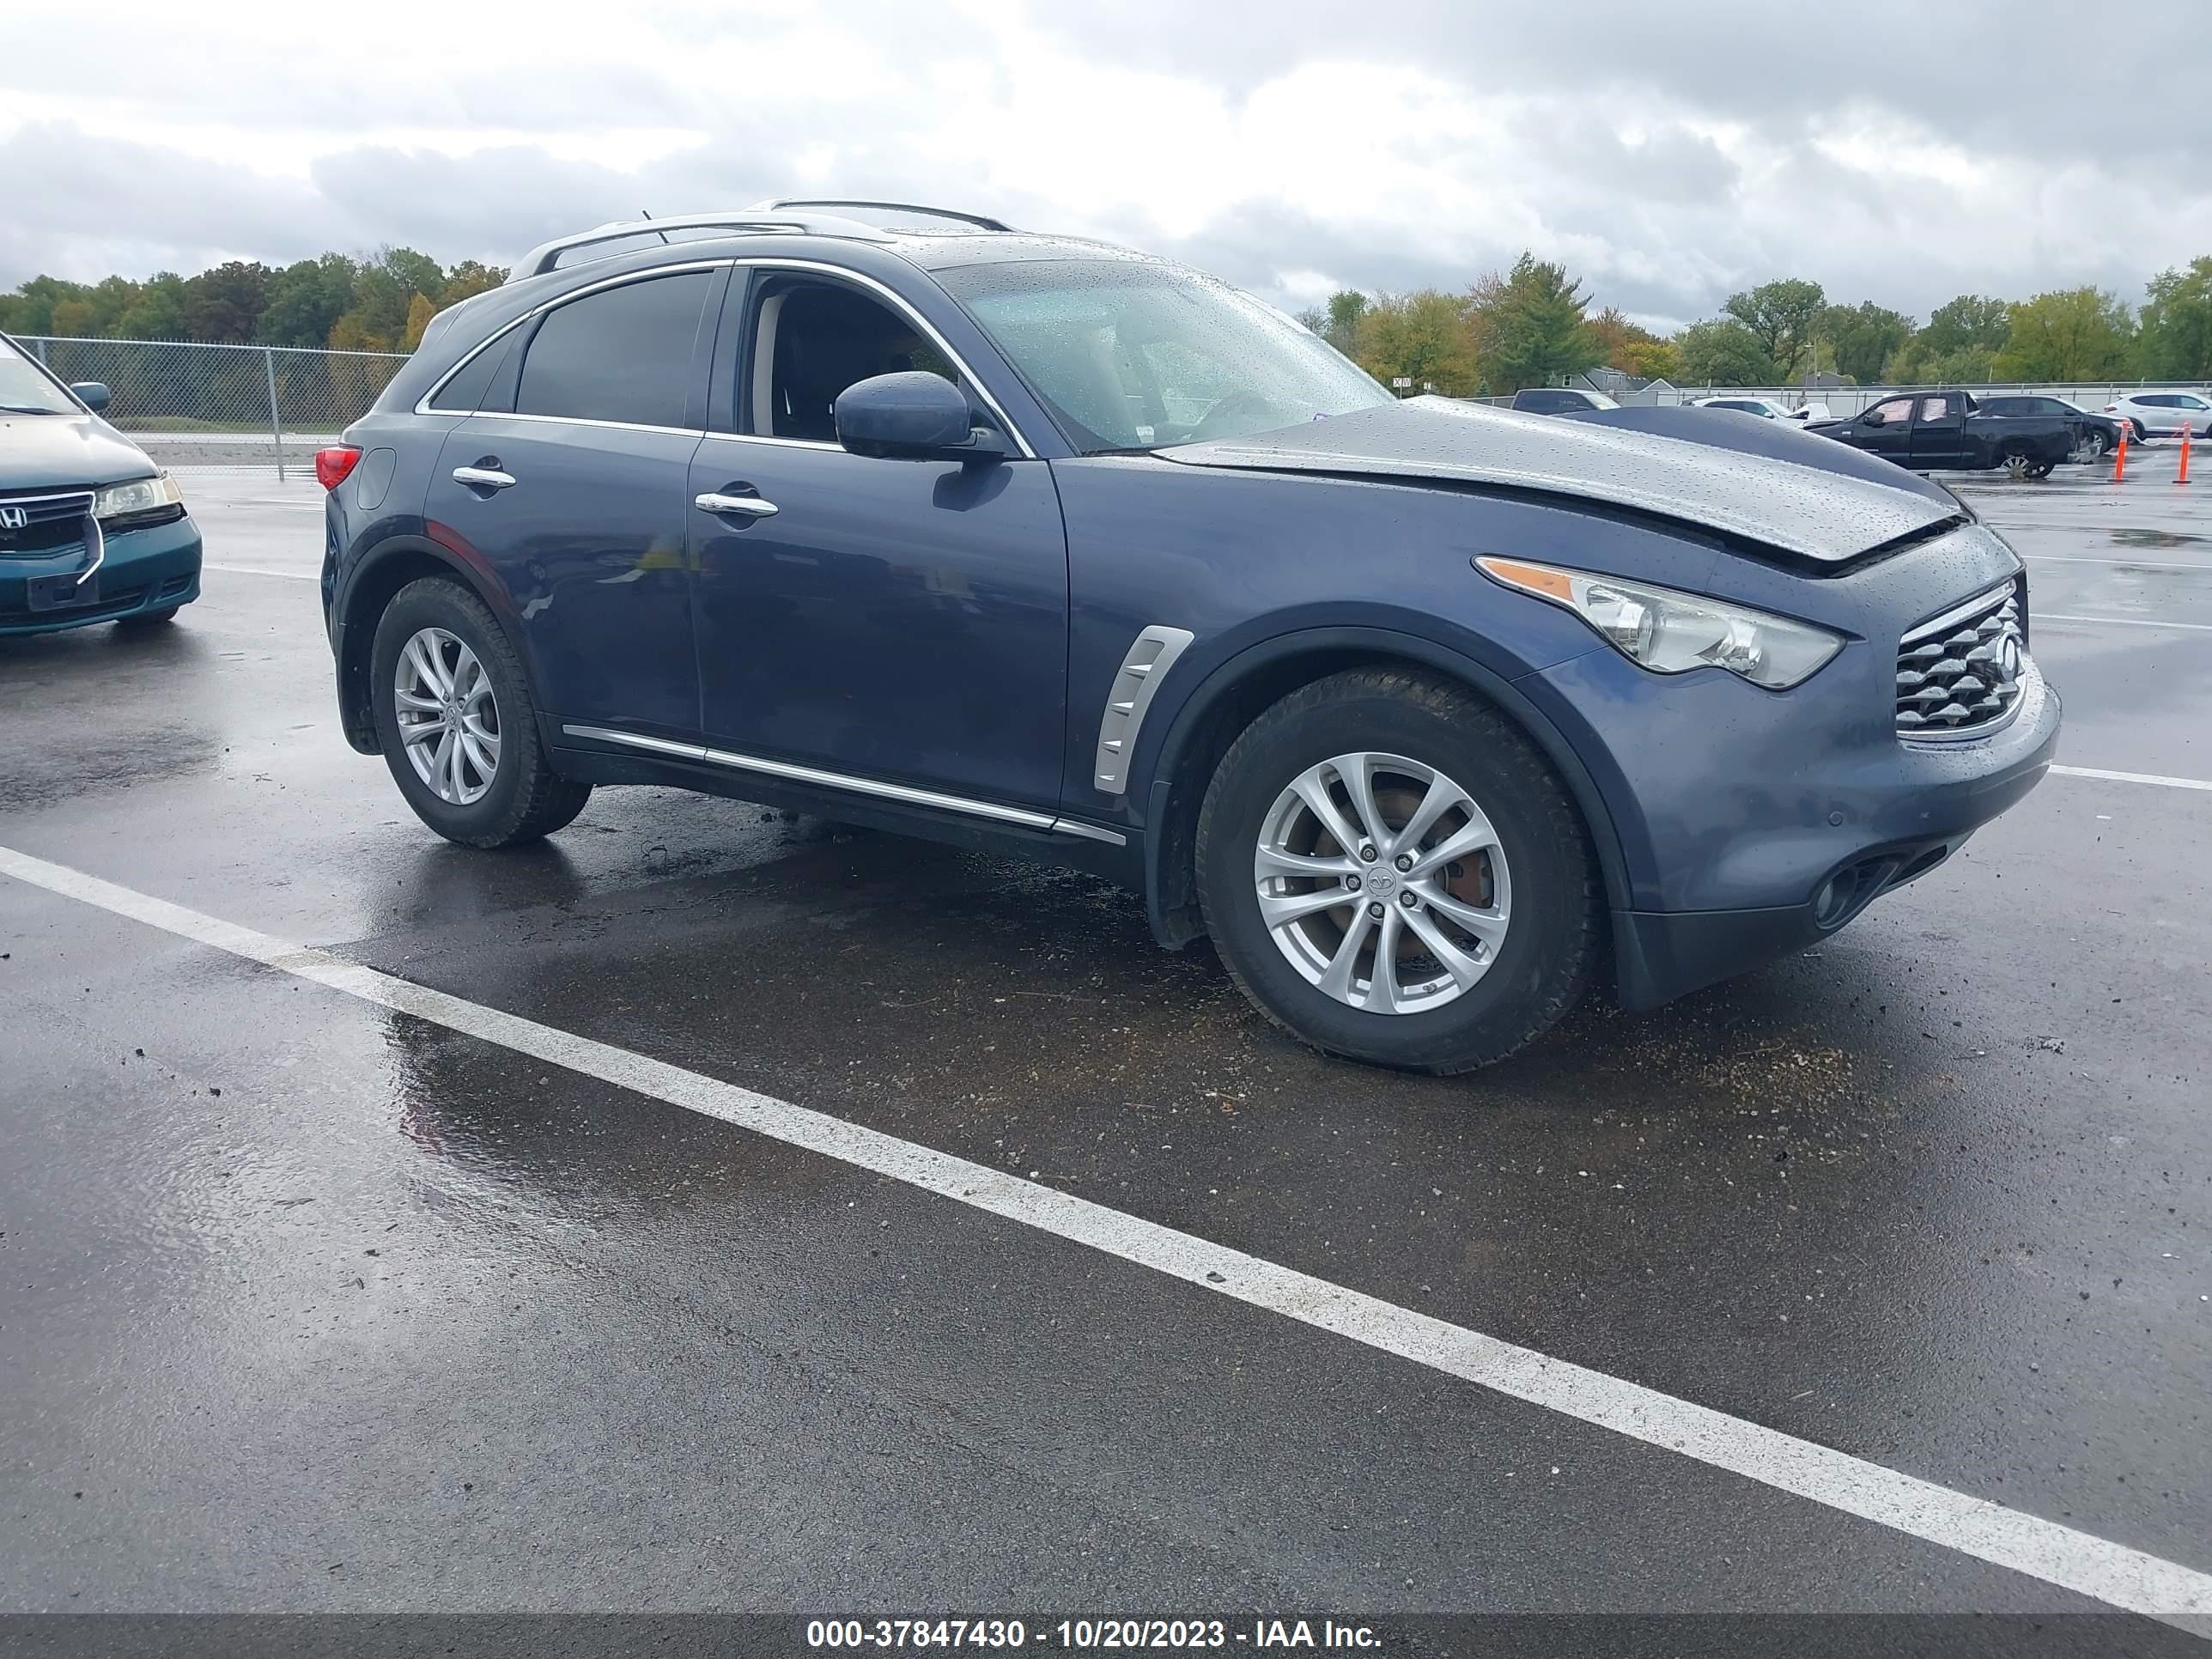 vin: JN8AS1MW8AM851271 JN8AS1MW8AM851271 2010 infiniti fx 3500 for Sale in 46806, 4300 Oxford St., Fort Wayne, USA